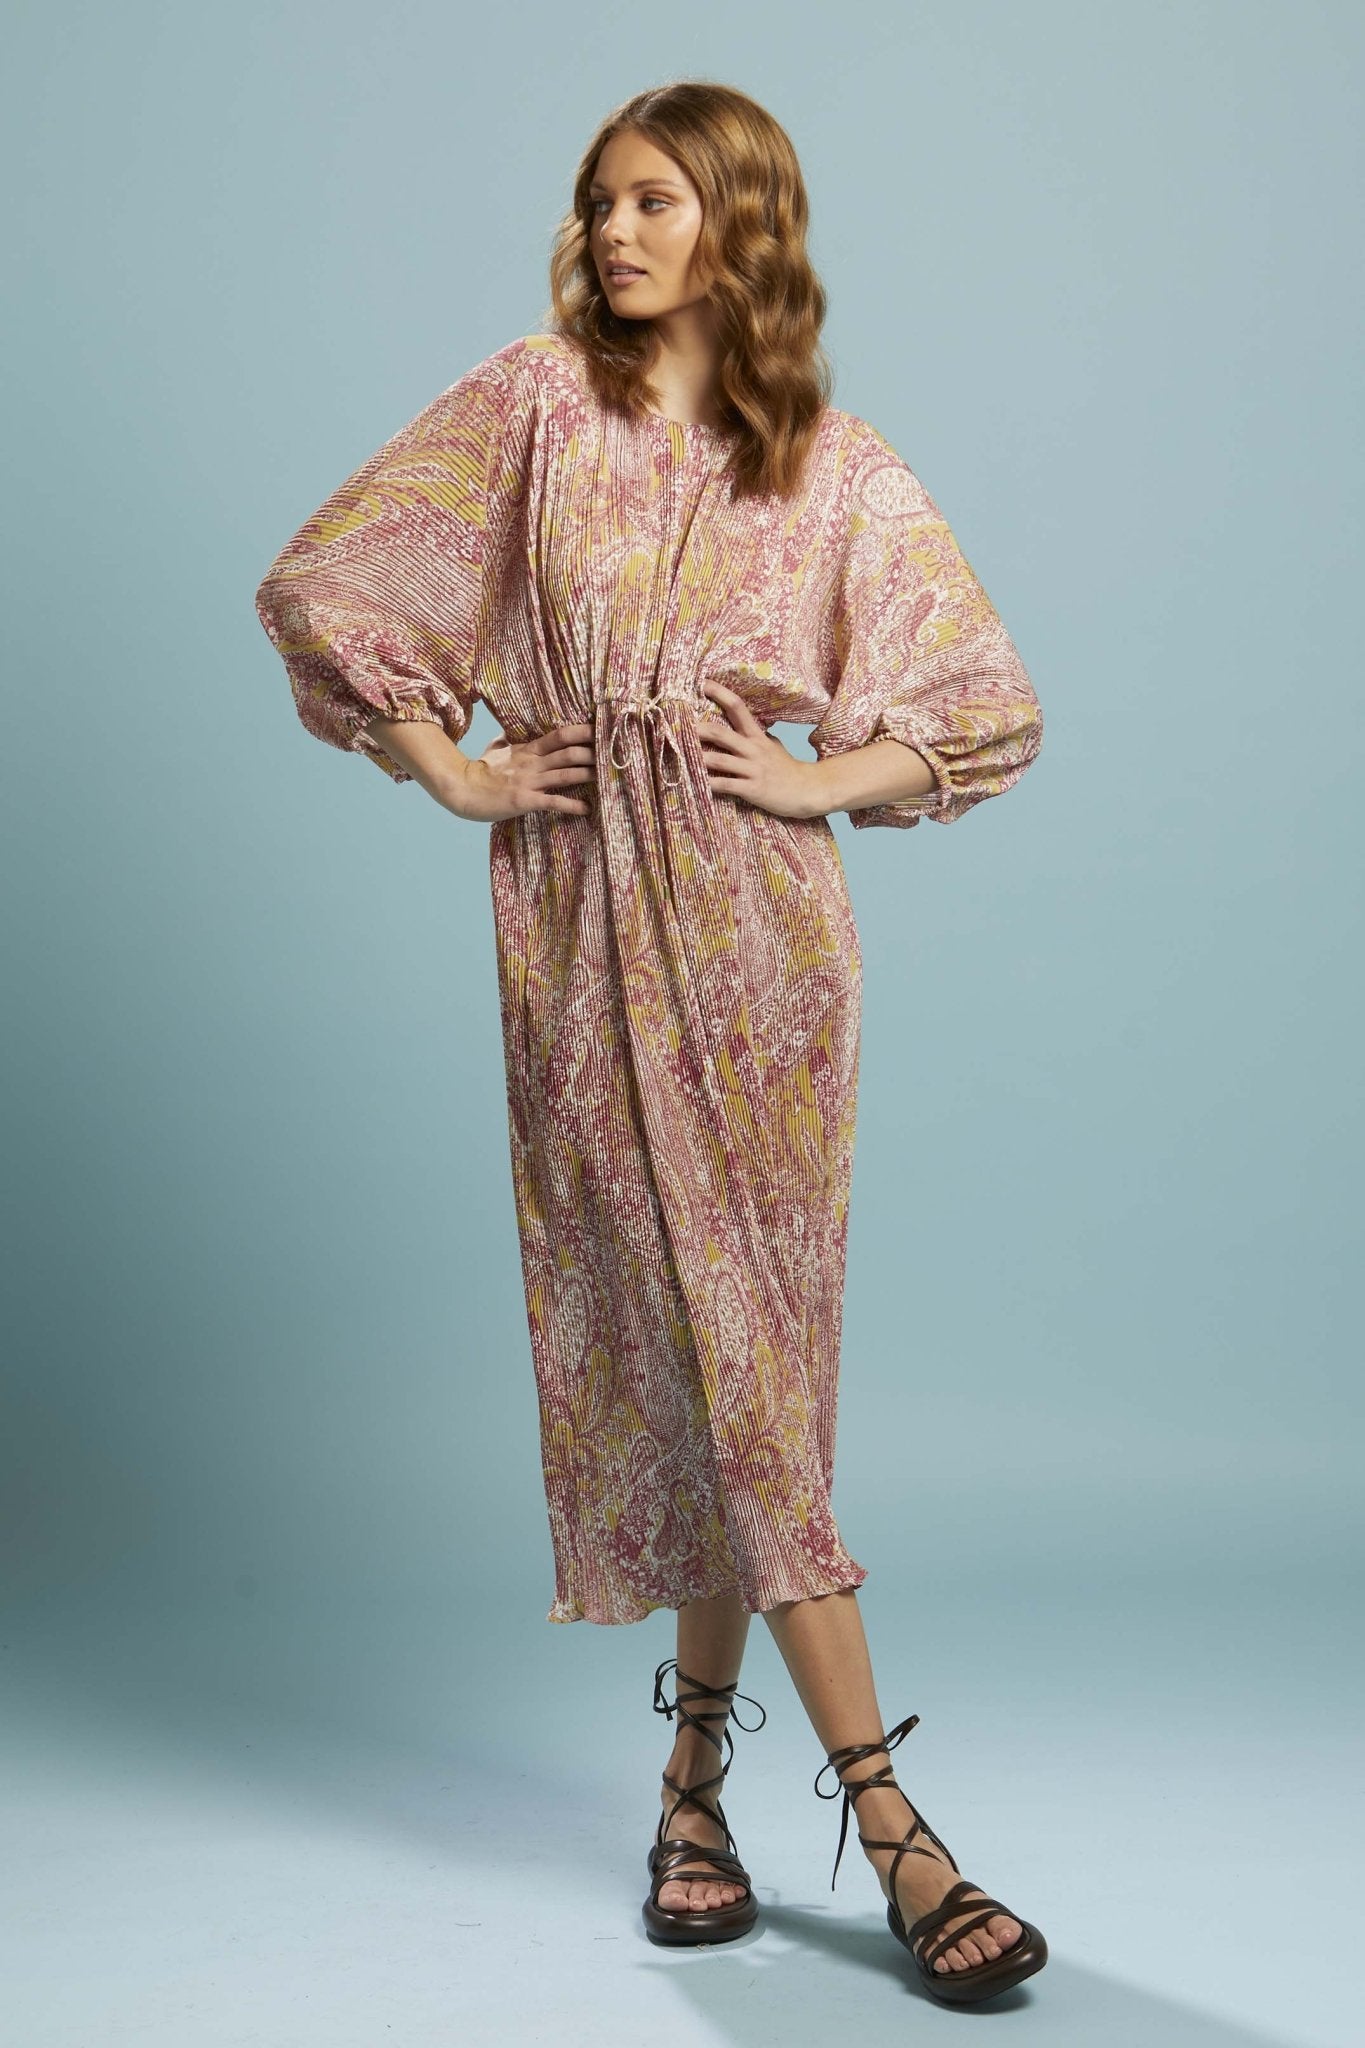 Fate + Becker First Move Pleated Midi Dress in Golden Paisley - Hey Sara